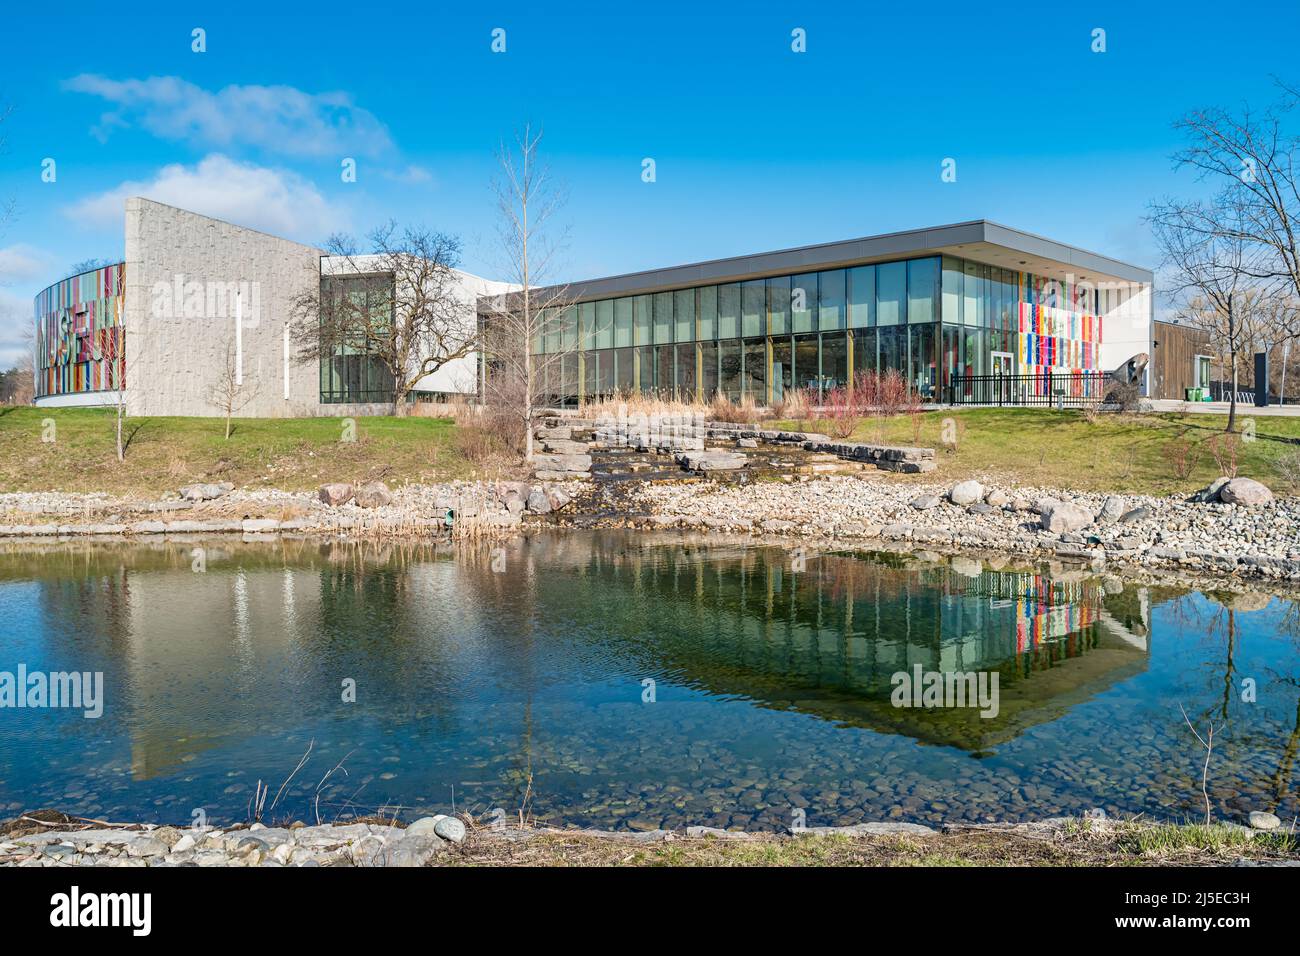 Ken Seiling Waterloo Region Museum in Kitchener, Ontario, Canada on a sunny day. Stock Photo